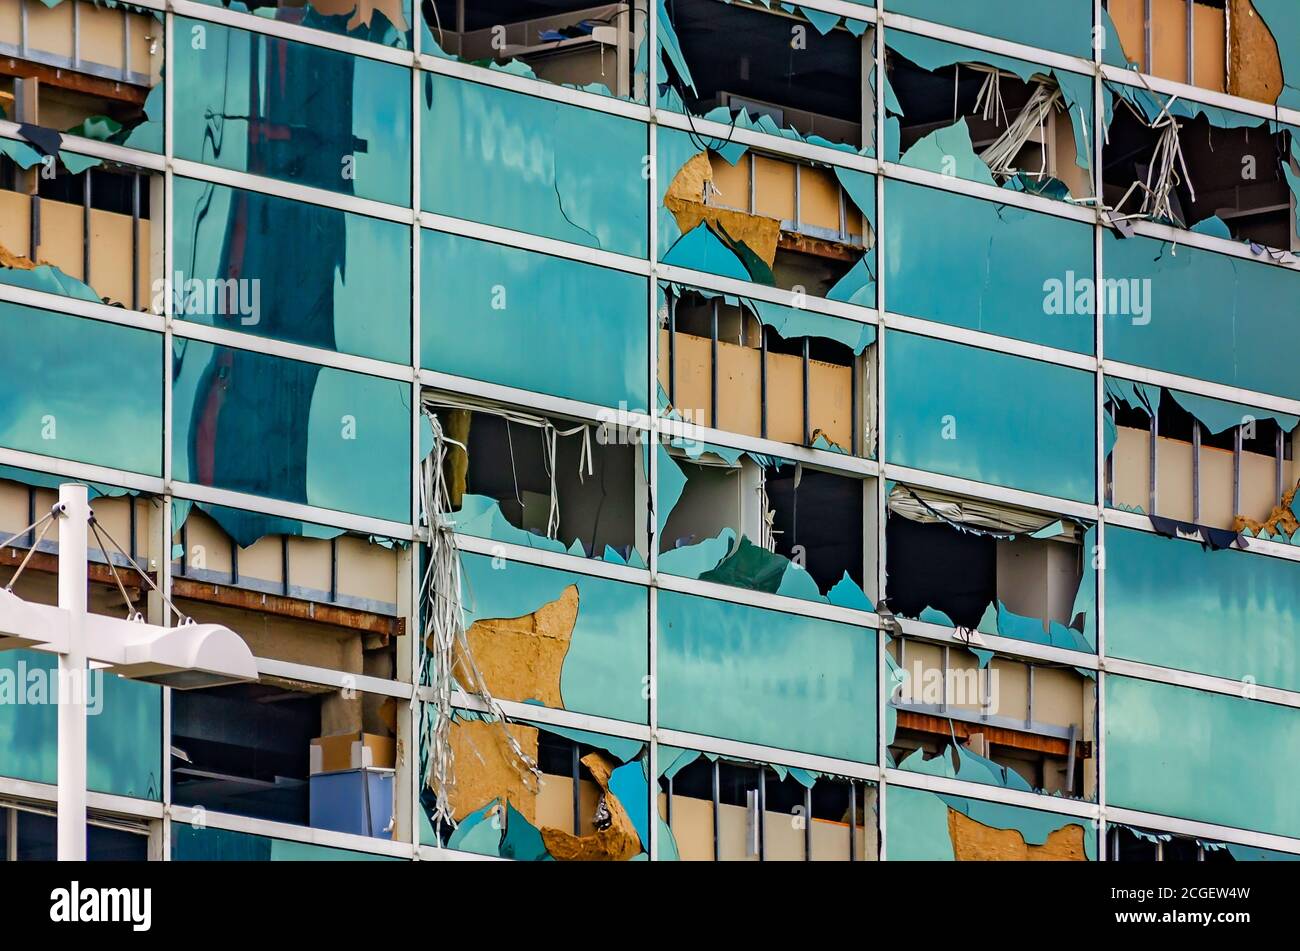 Windows are shattered at the Capital One Tower after Hurricane Laura, Sept. 9, 2020, in Lake Charles, Louisiana. Stock Photo